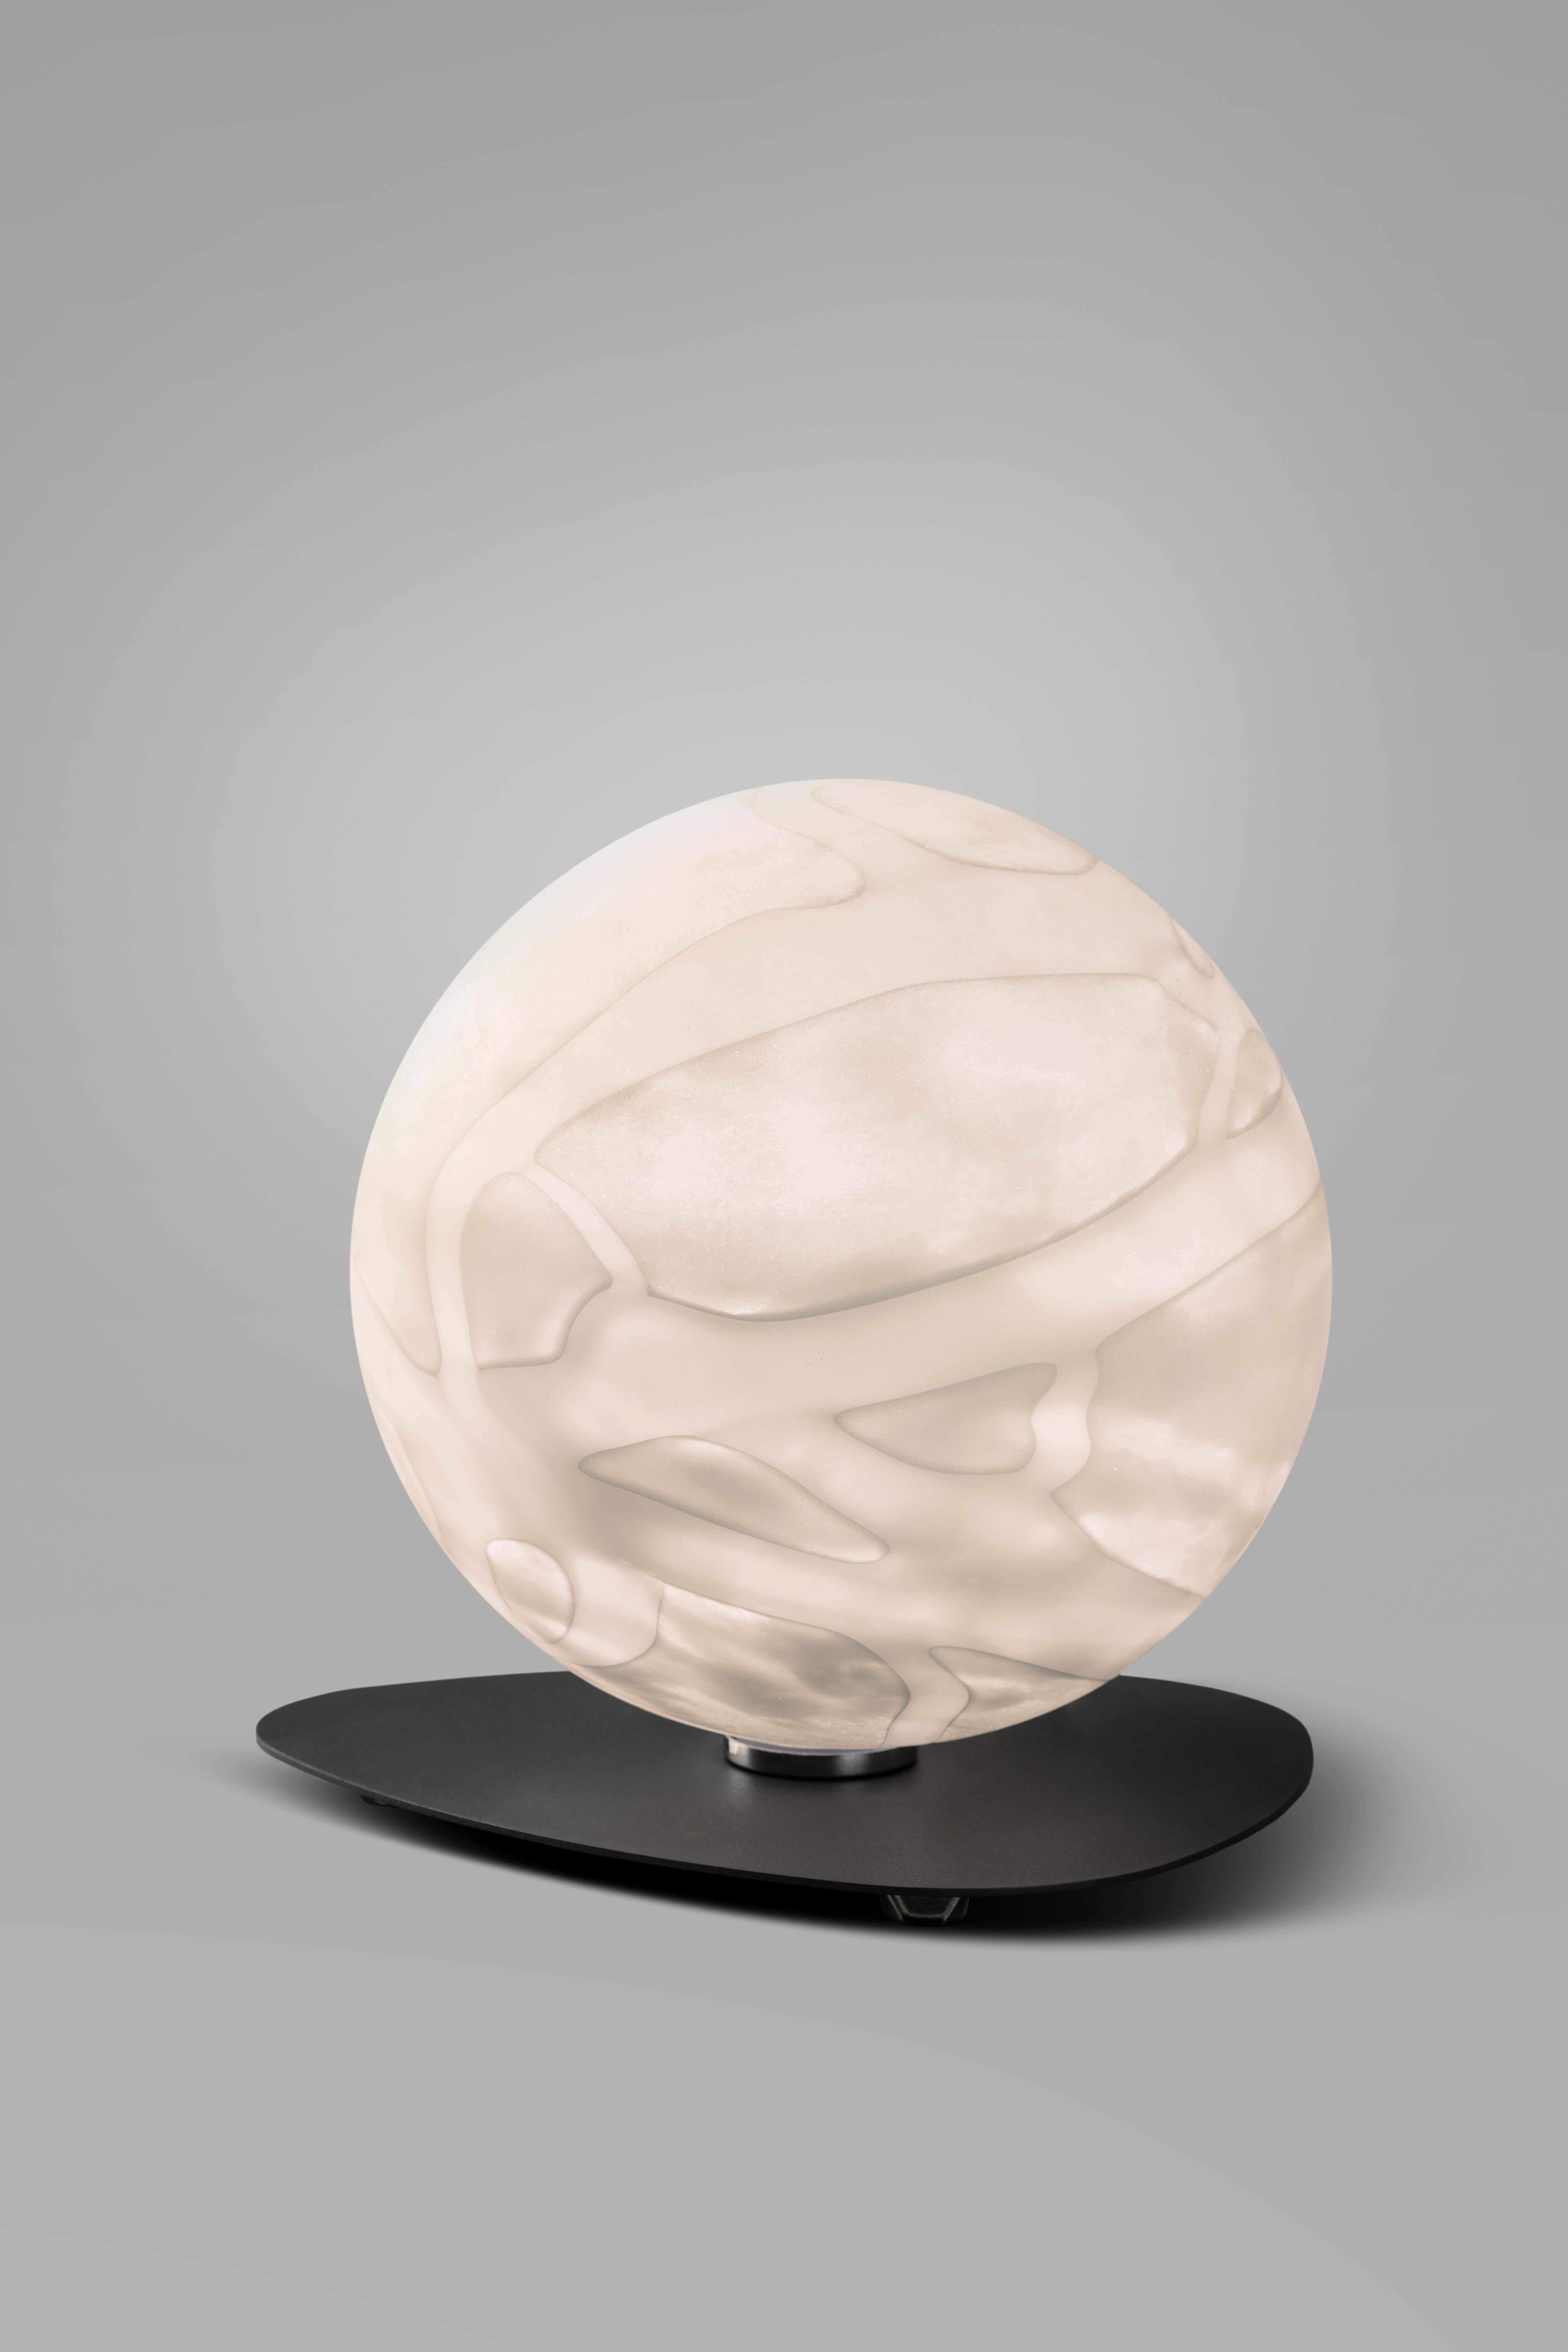 Enceladus Sculpted Table Lamp, Ludovic Clément D’armont In New Condition For Sale In Geneve, CH